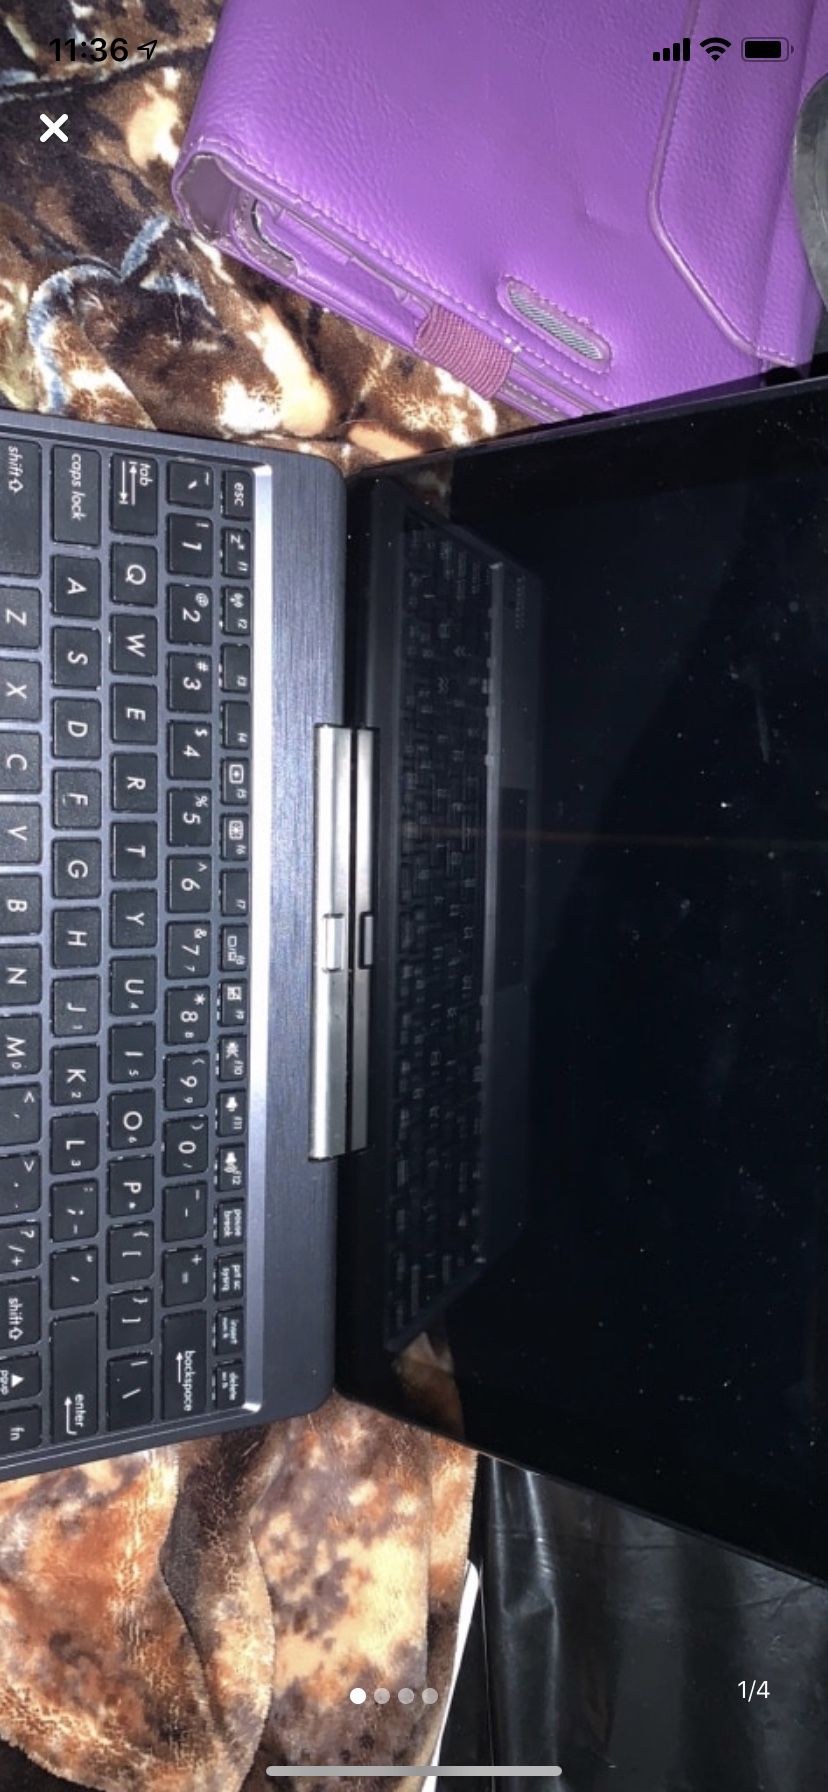 Asus laptop with case